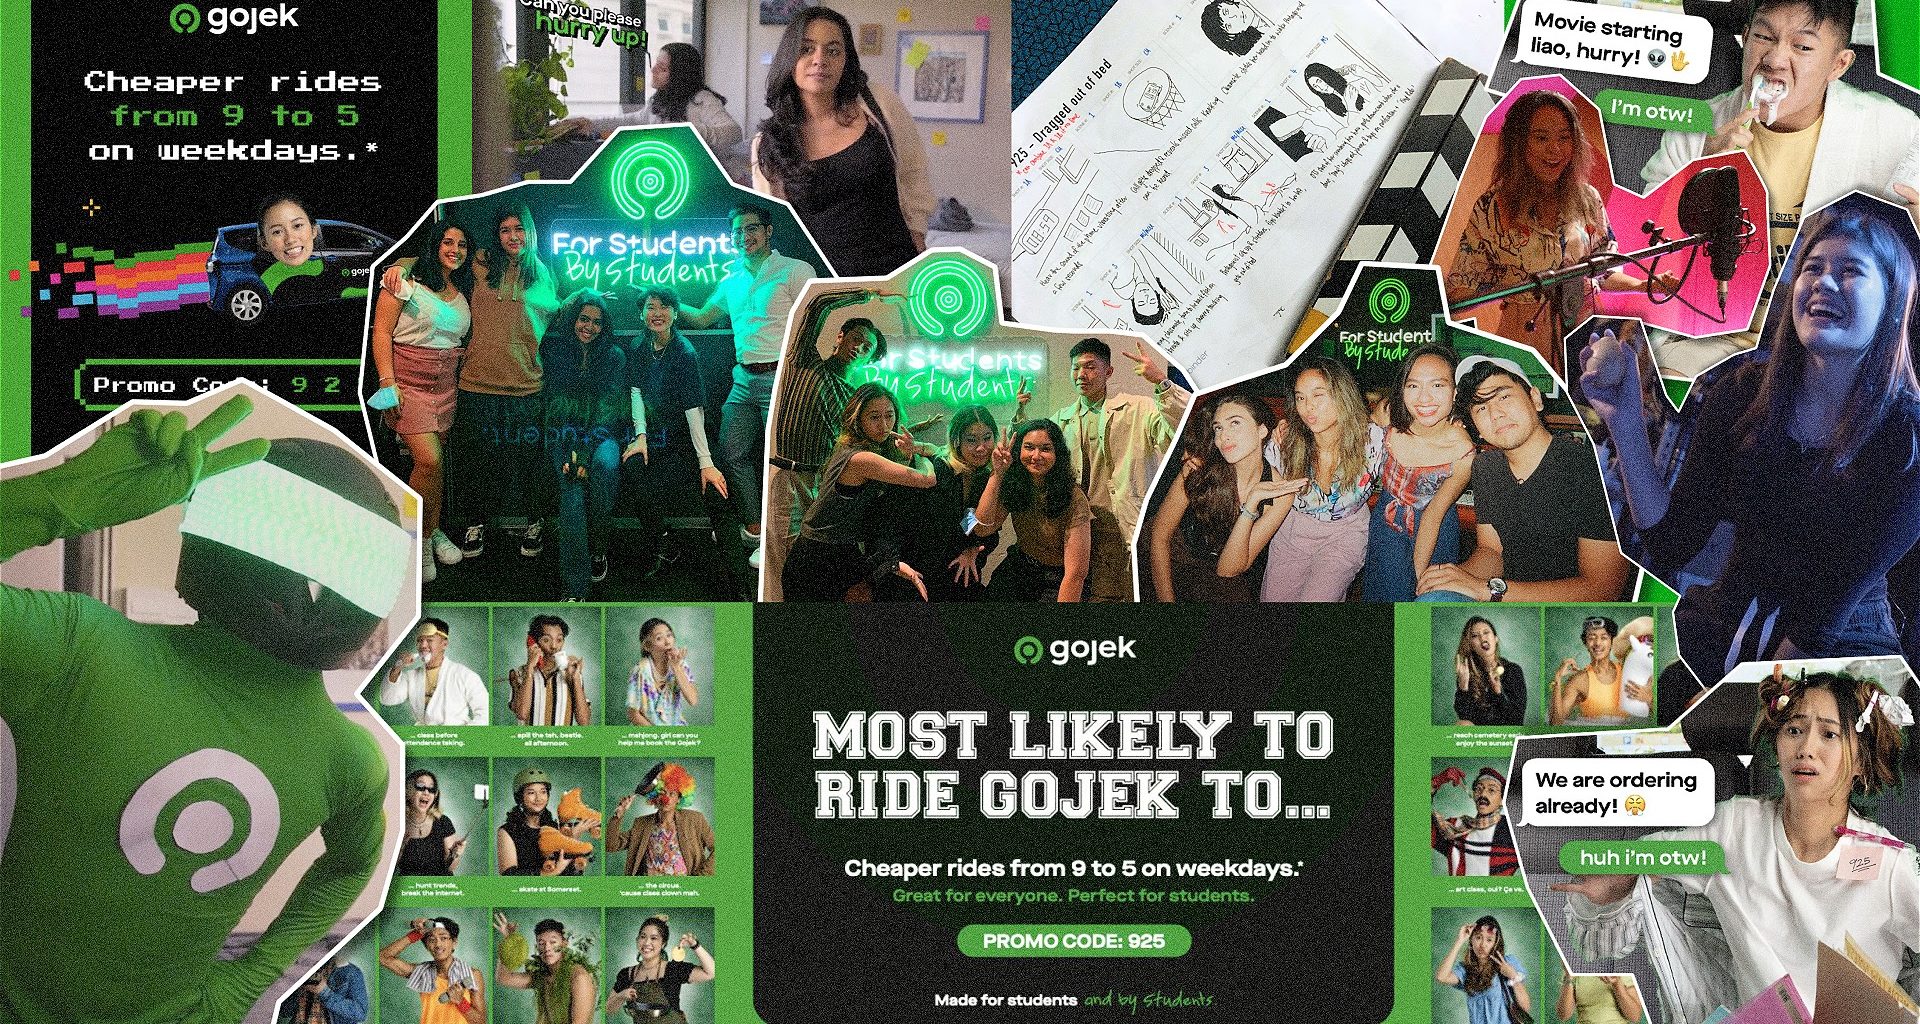 [PROMO CODE INSIDE] Gojek will give 50% discount on your off-peak rides during weekdays with this promo code - Alvinology